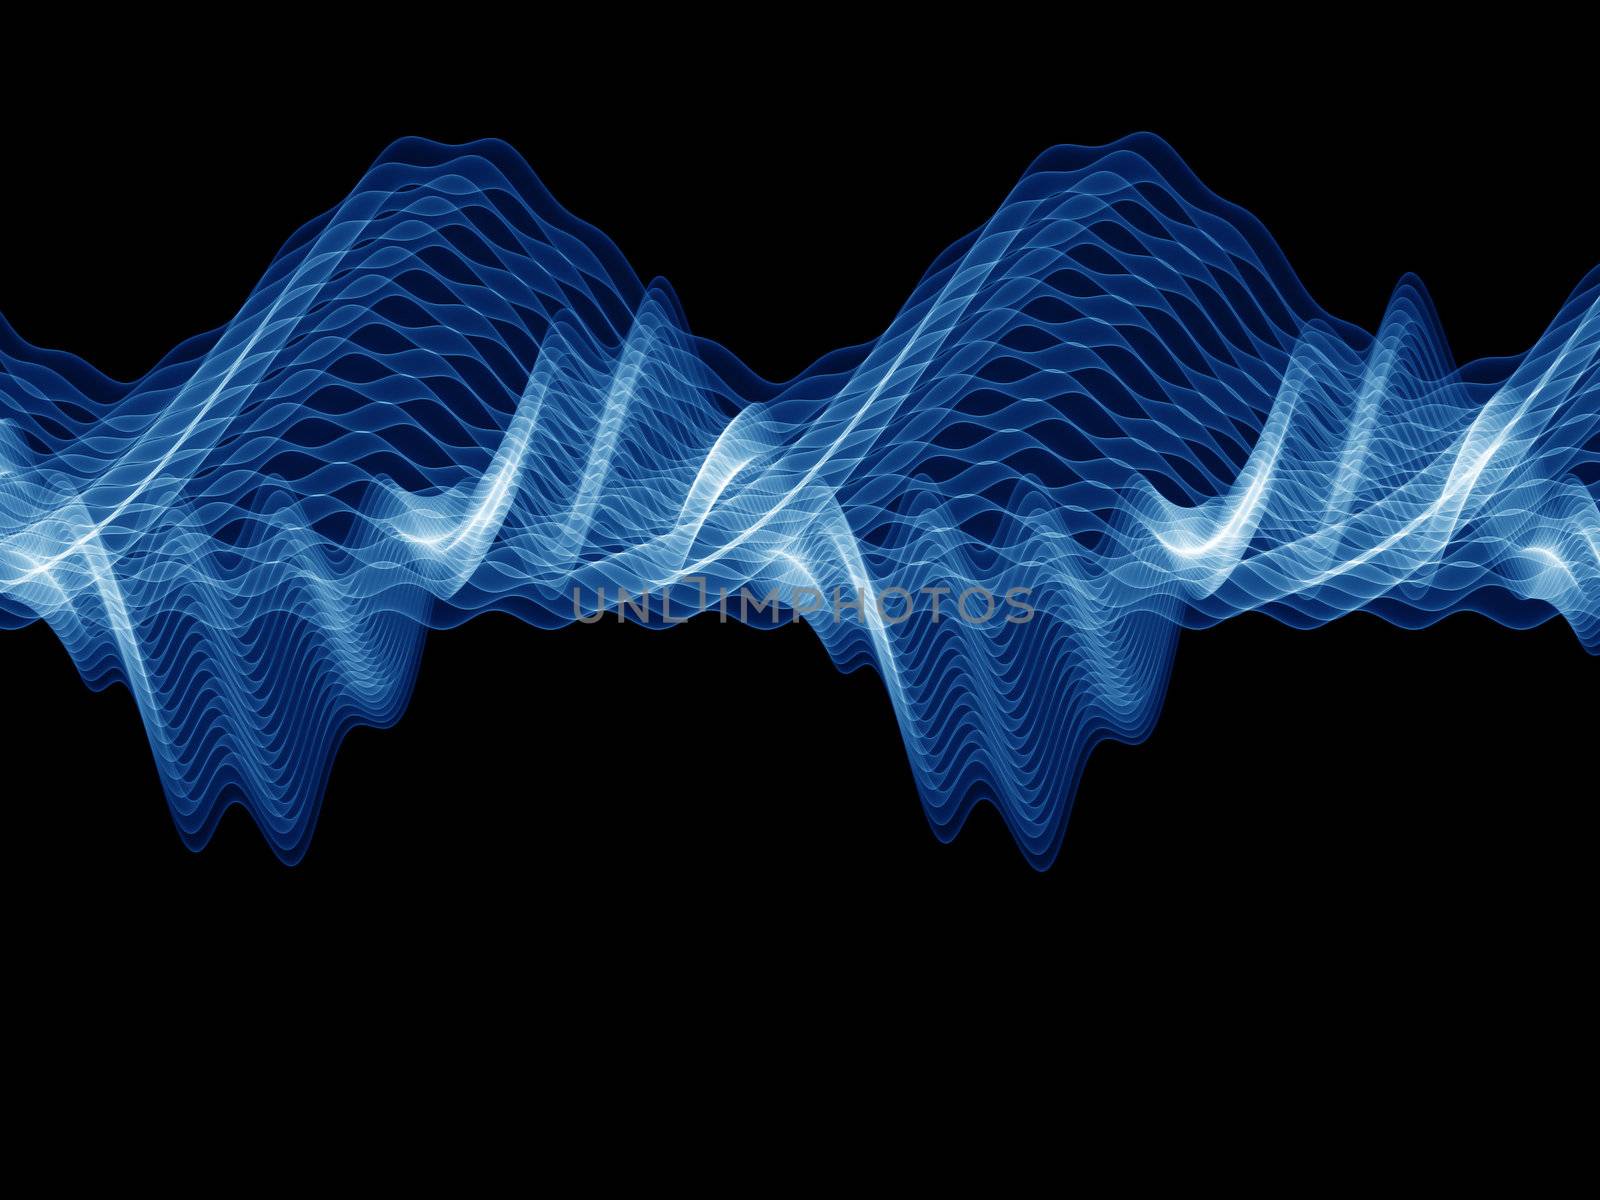 Abstract sine wave rendered in blue against black background